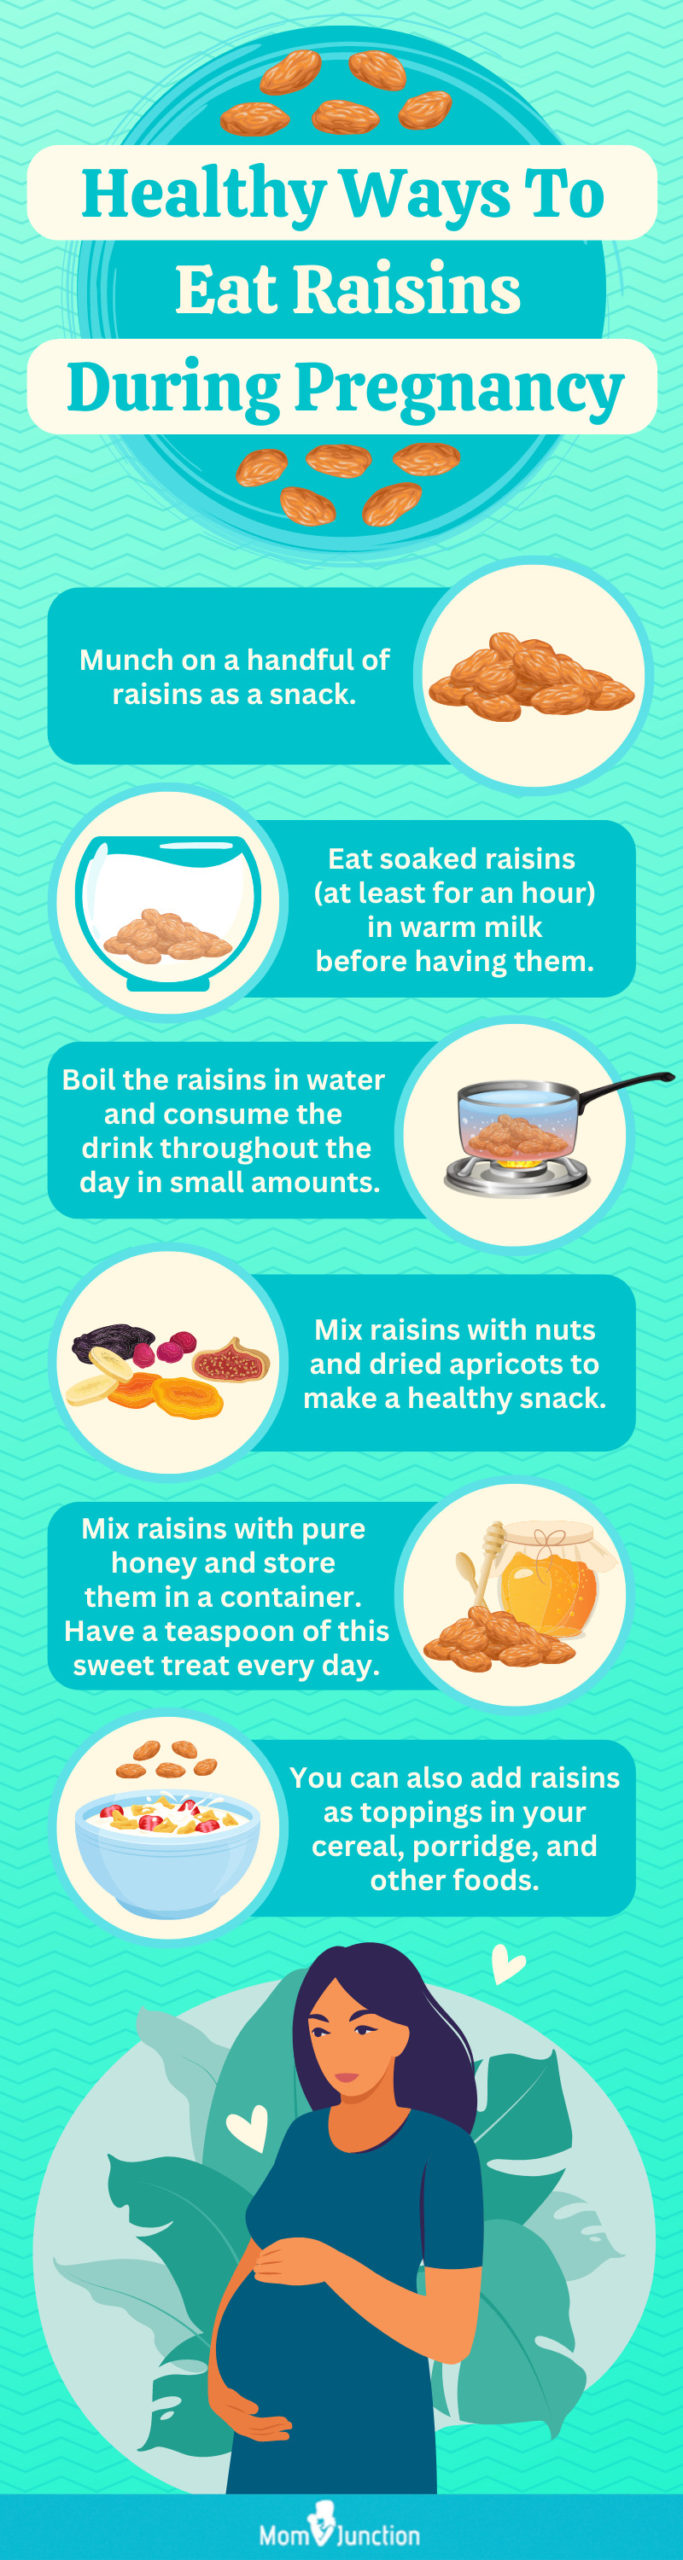 healthy ways to eat raisins during pregnancy (infographic)